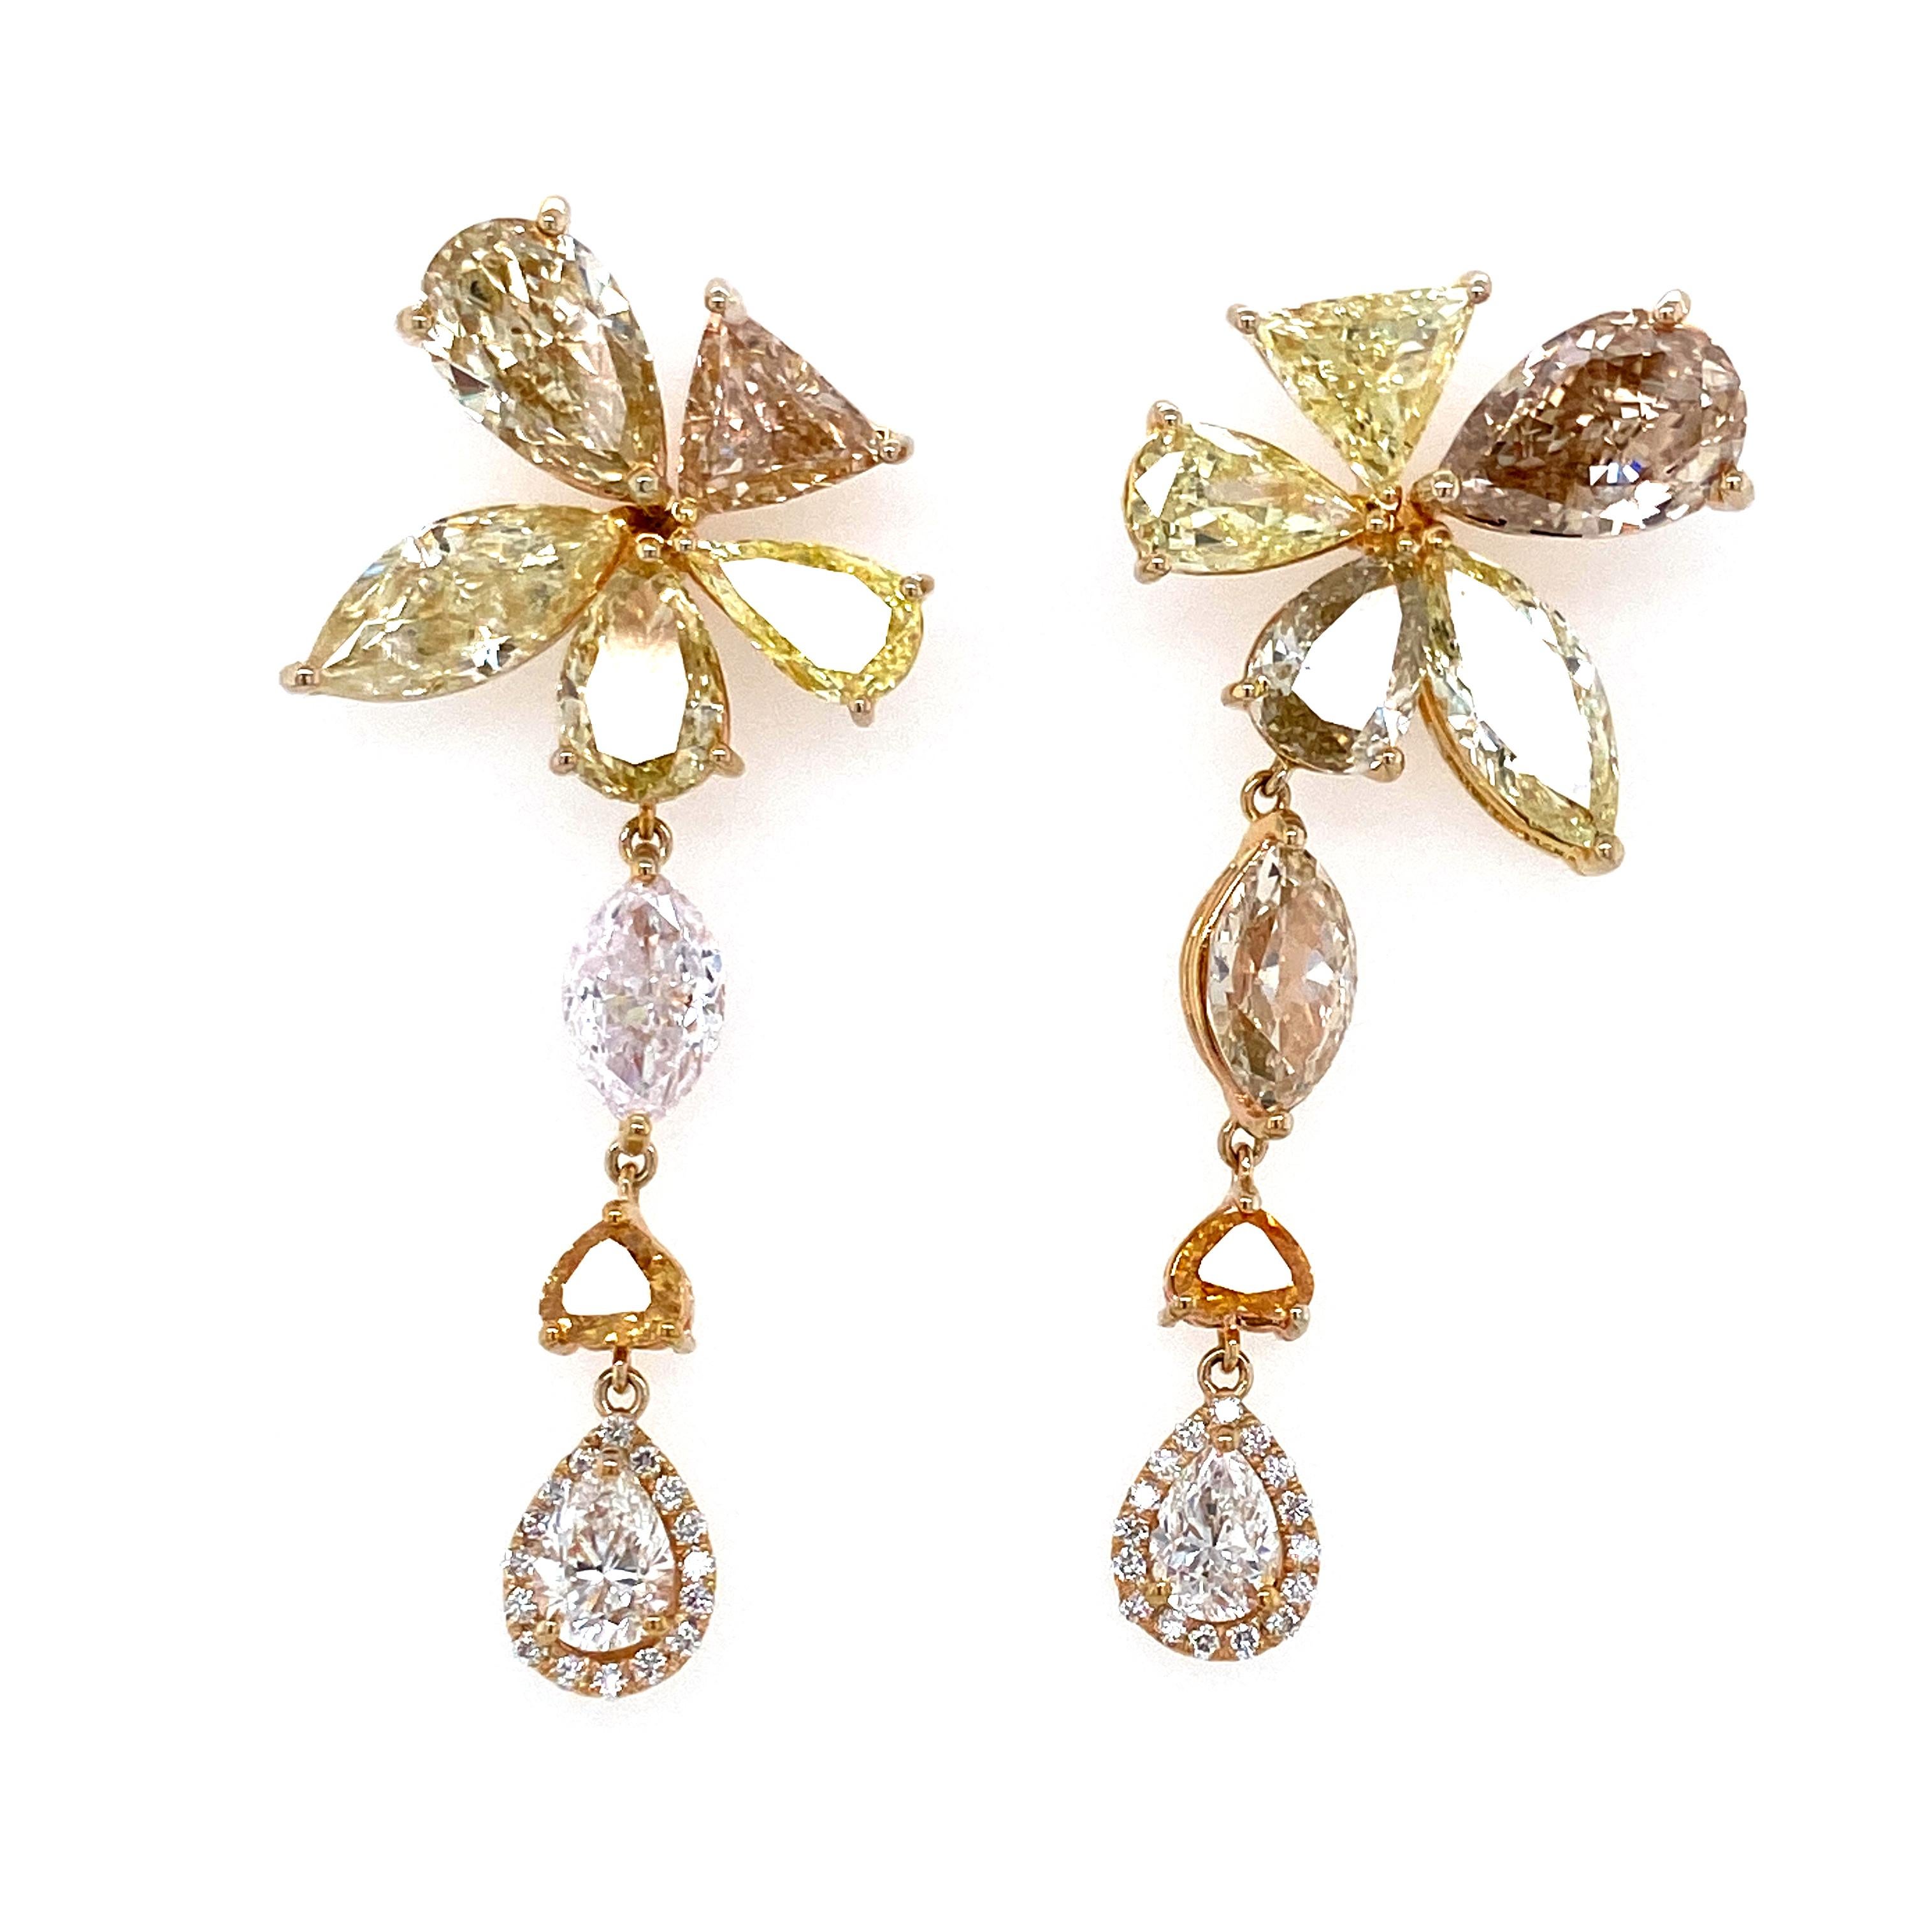 14.45 Carat Natural Fancy Coloured Diamonds And White Diamond Gold Earrings:

A magnificent pair of earrings, it features 16 fancy coloured diamonds and white diamonds in multiple cuts and shapes weighing 14.45 carat. The fancy coloured diamonds are